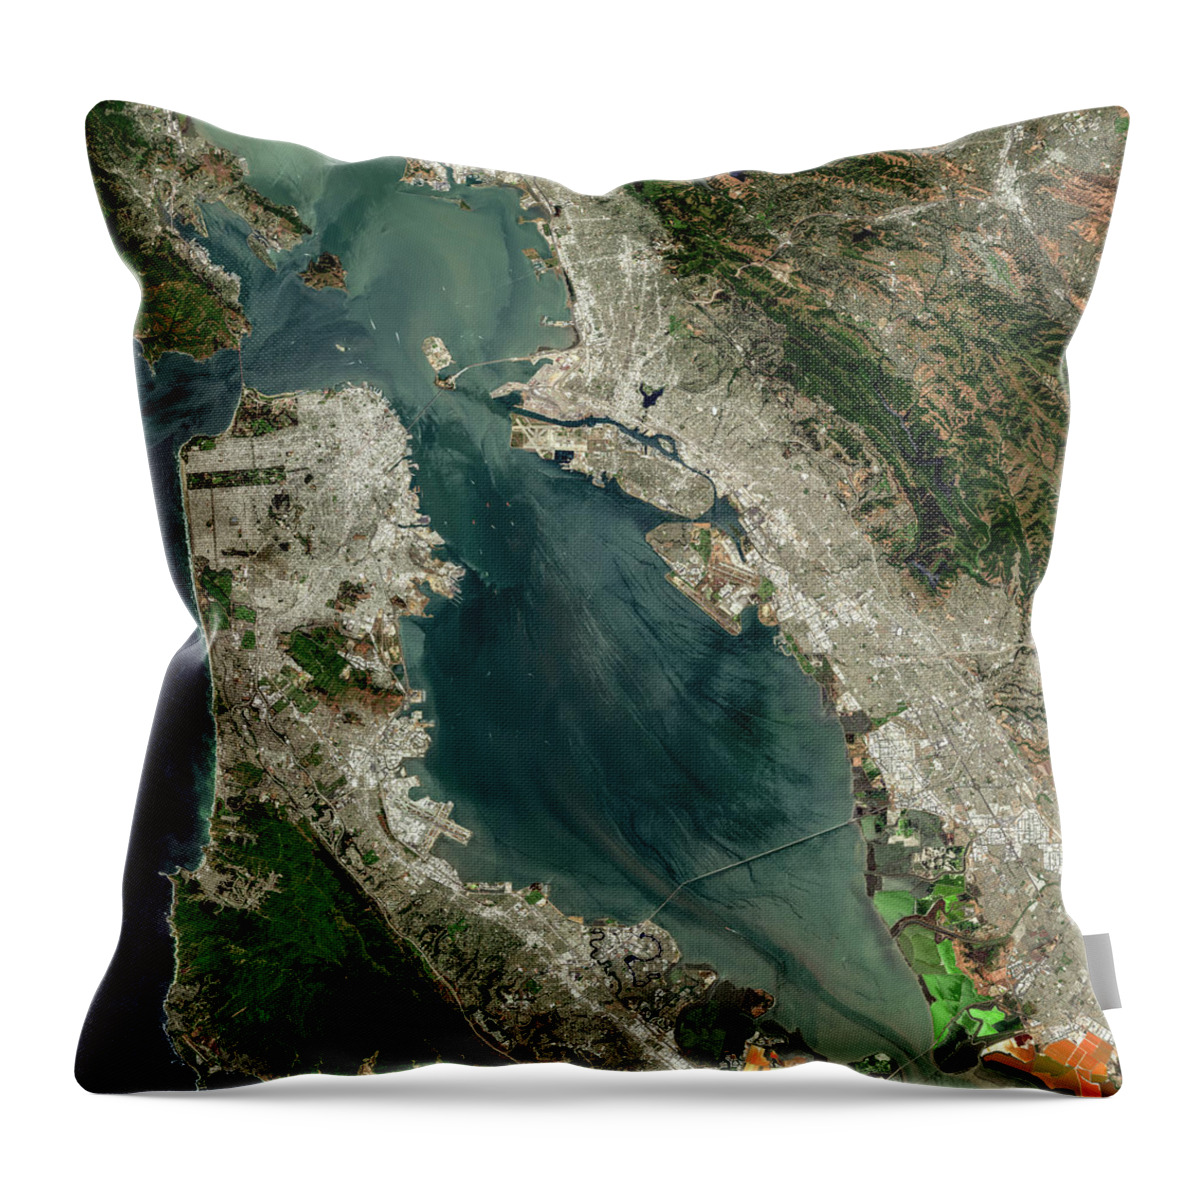 Satellite Image Throw Pillow featuring the digital art San Francisco Bay from space by Christian Pauschert